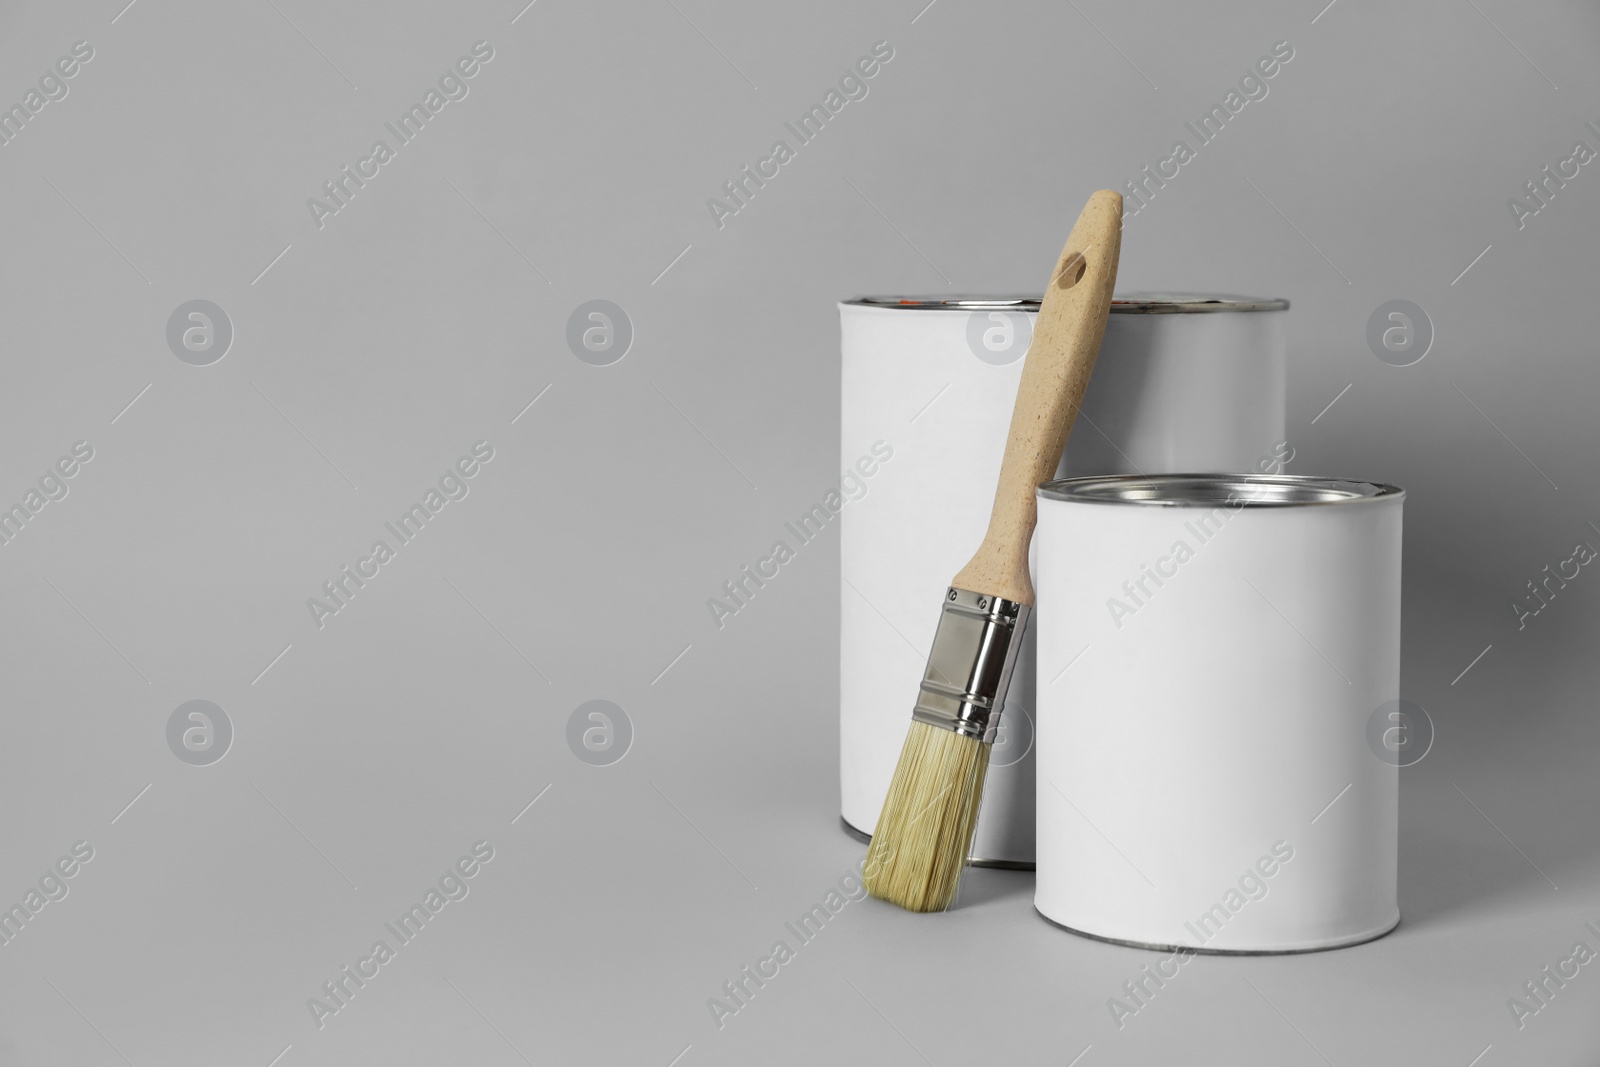 Photo of Cans of orange paint and brush on grey background. Space for text